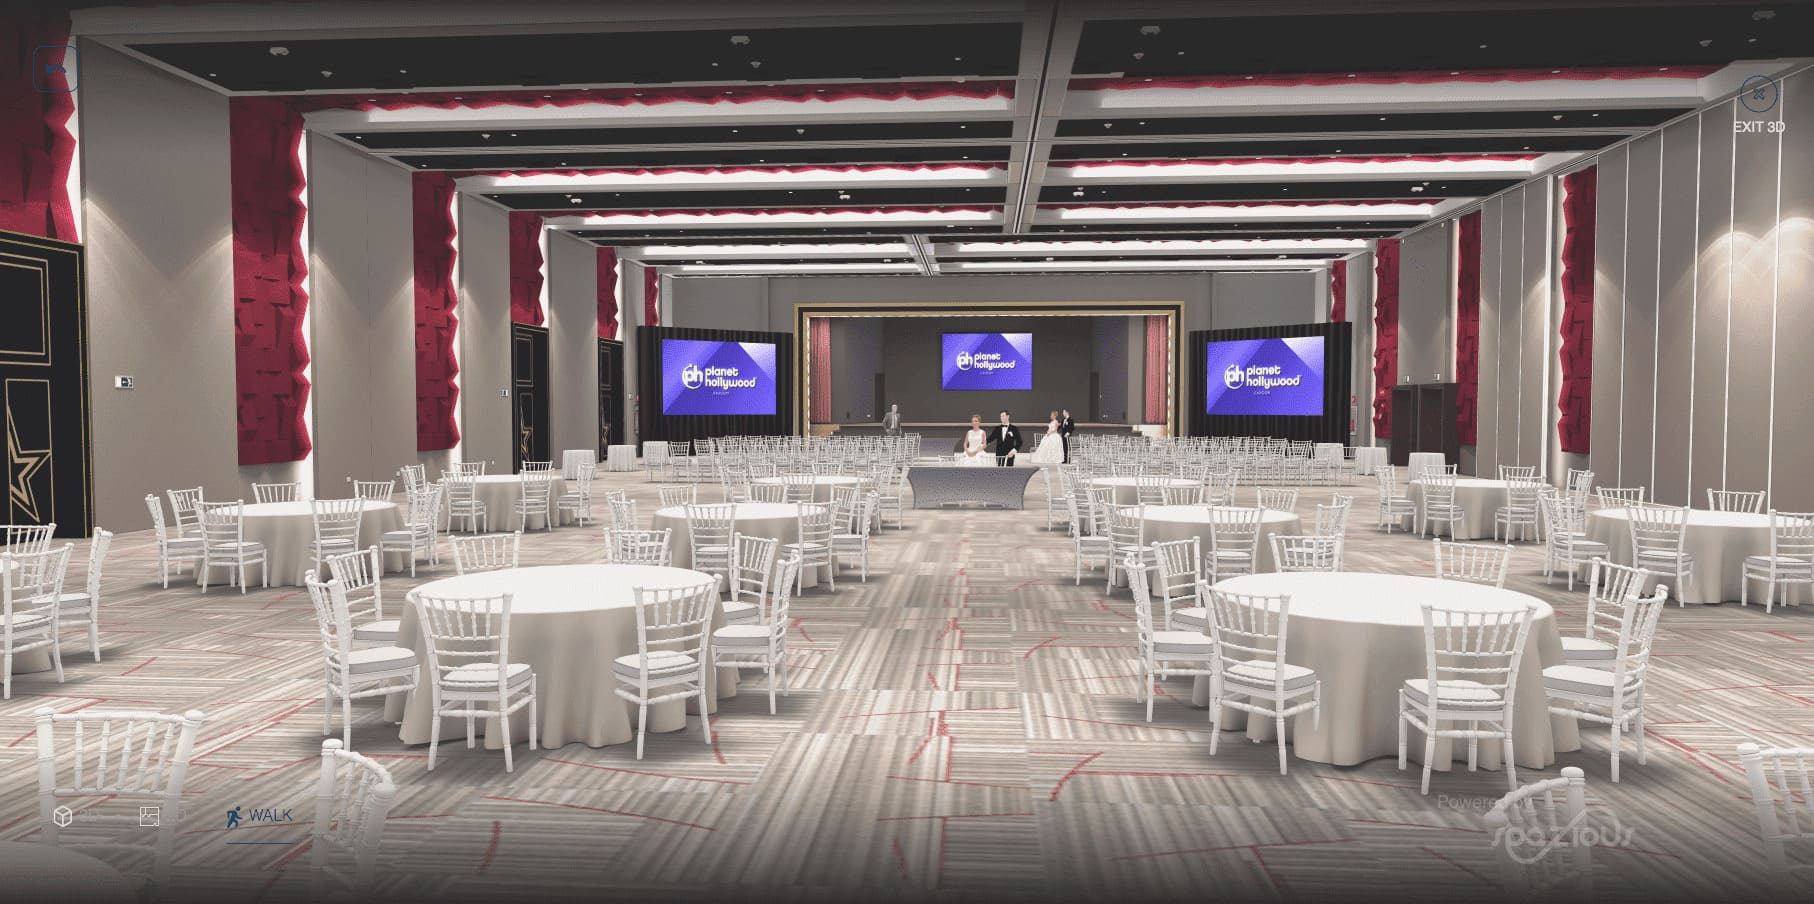 Using a 3D floor plan software for events and meetings